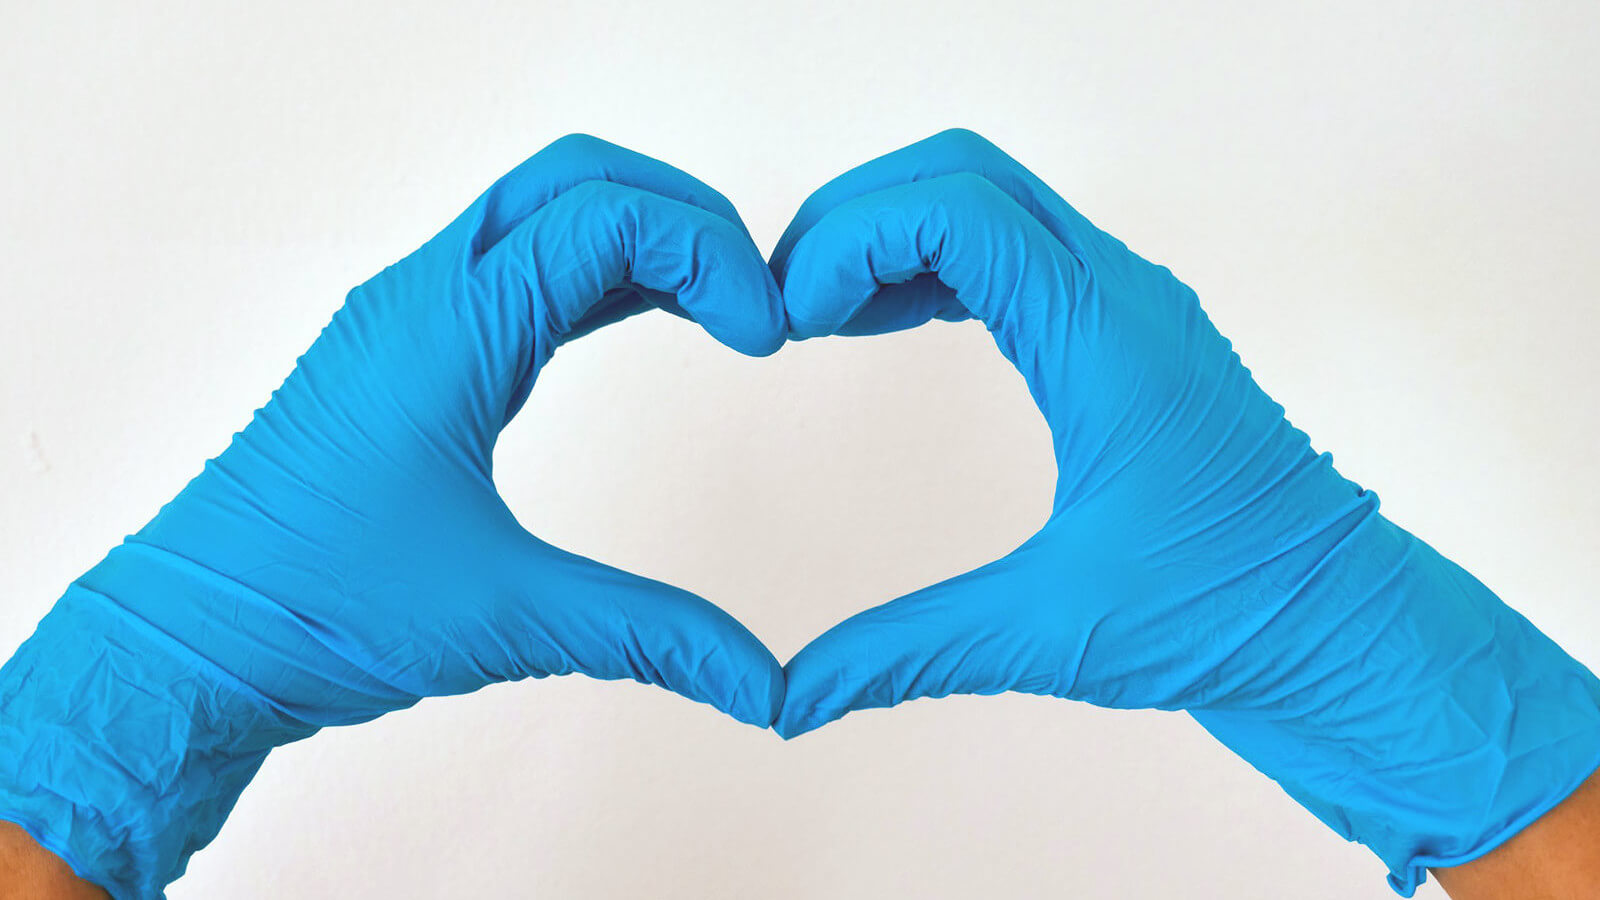 hands wearing medical gloves in the shape of a heart